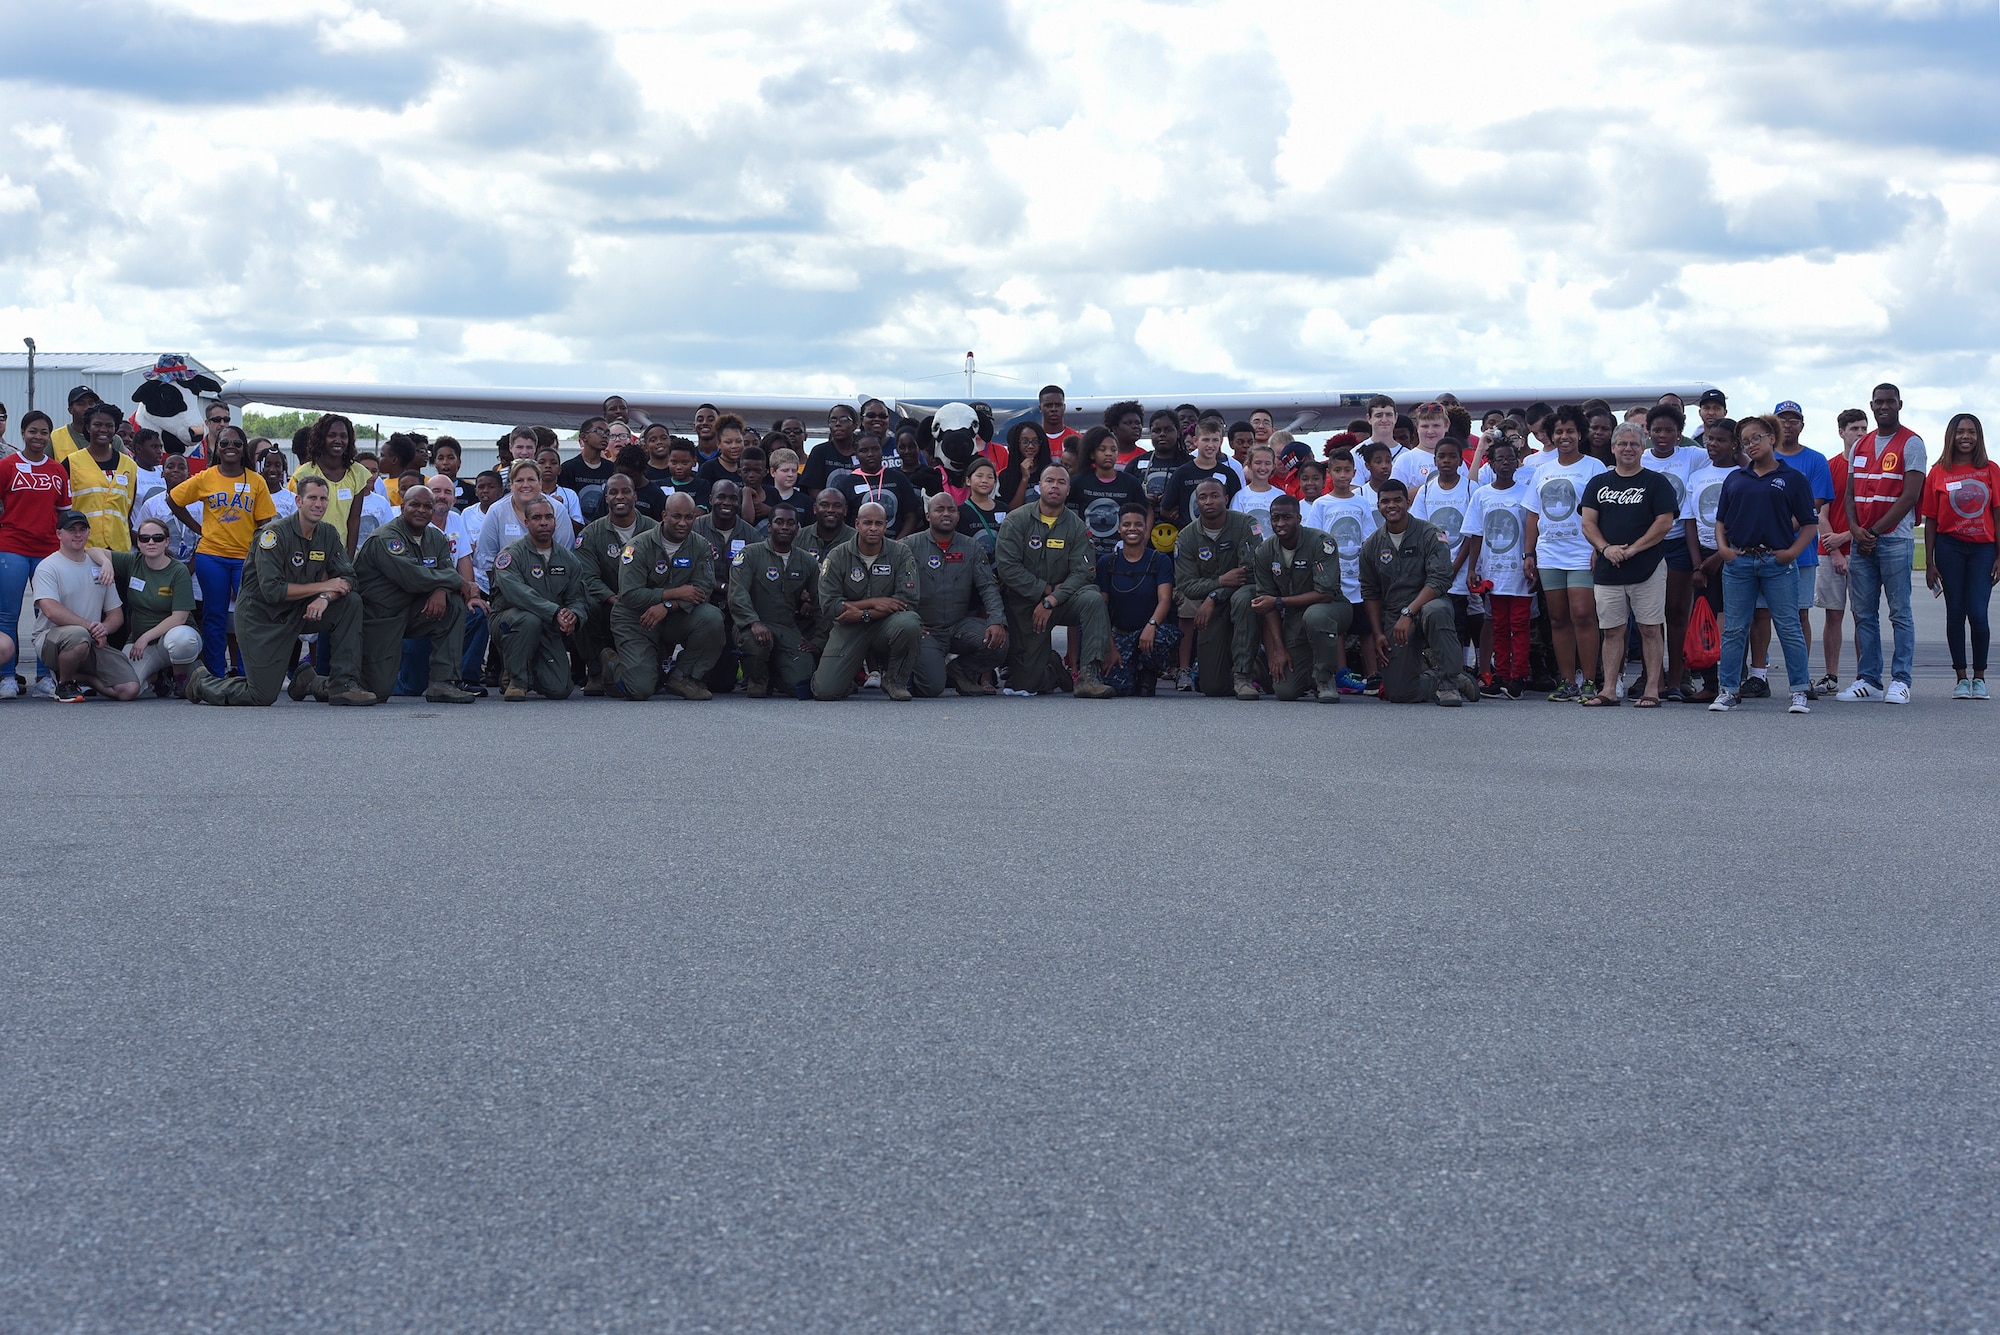 Local youth pose with collegiate advisors and Airmen during the Eyes Above the Horizon diversity outreach program, July 22, 2017, in Valdosta, Ga. Approximately 100 10-19-year-olds learned about aviation as they took the Valdosta skies to commemorate the 76th Anniversary of the historic Tuskegee Airmen. The program focuses on mentoring and familiarizing underrepresented minorities with basic flying fundamentals. (U.S. Air Force photo by Senior Airman Greg Nash)